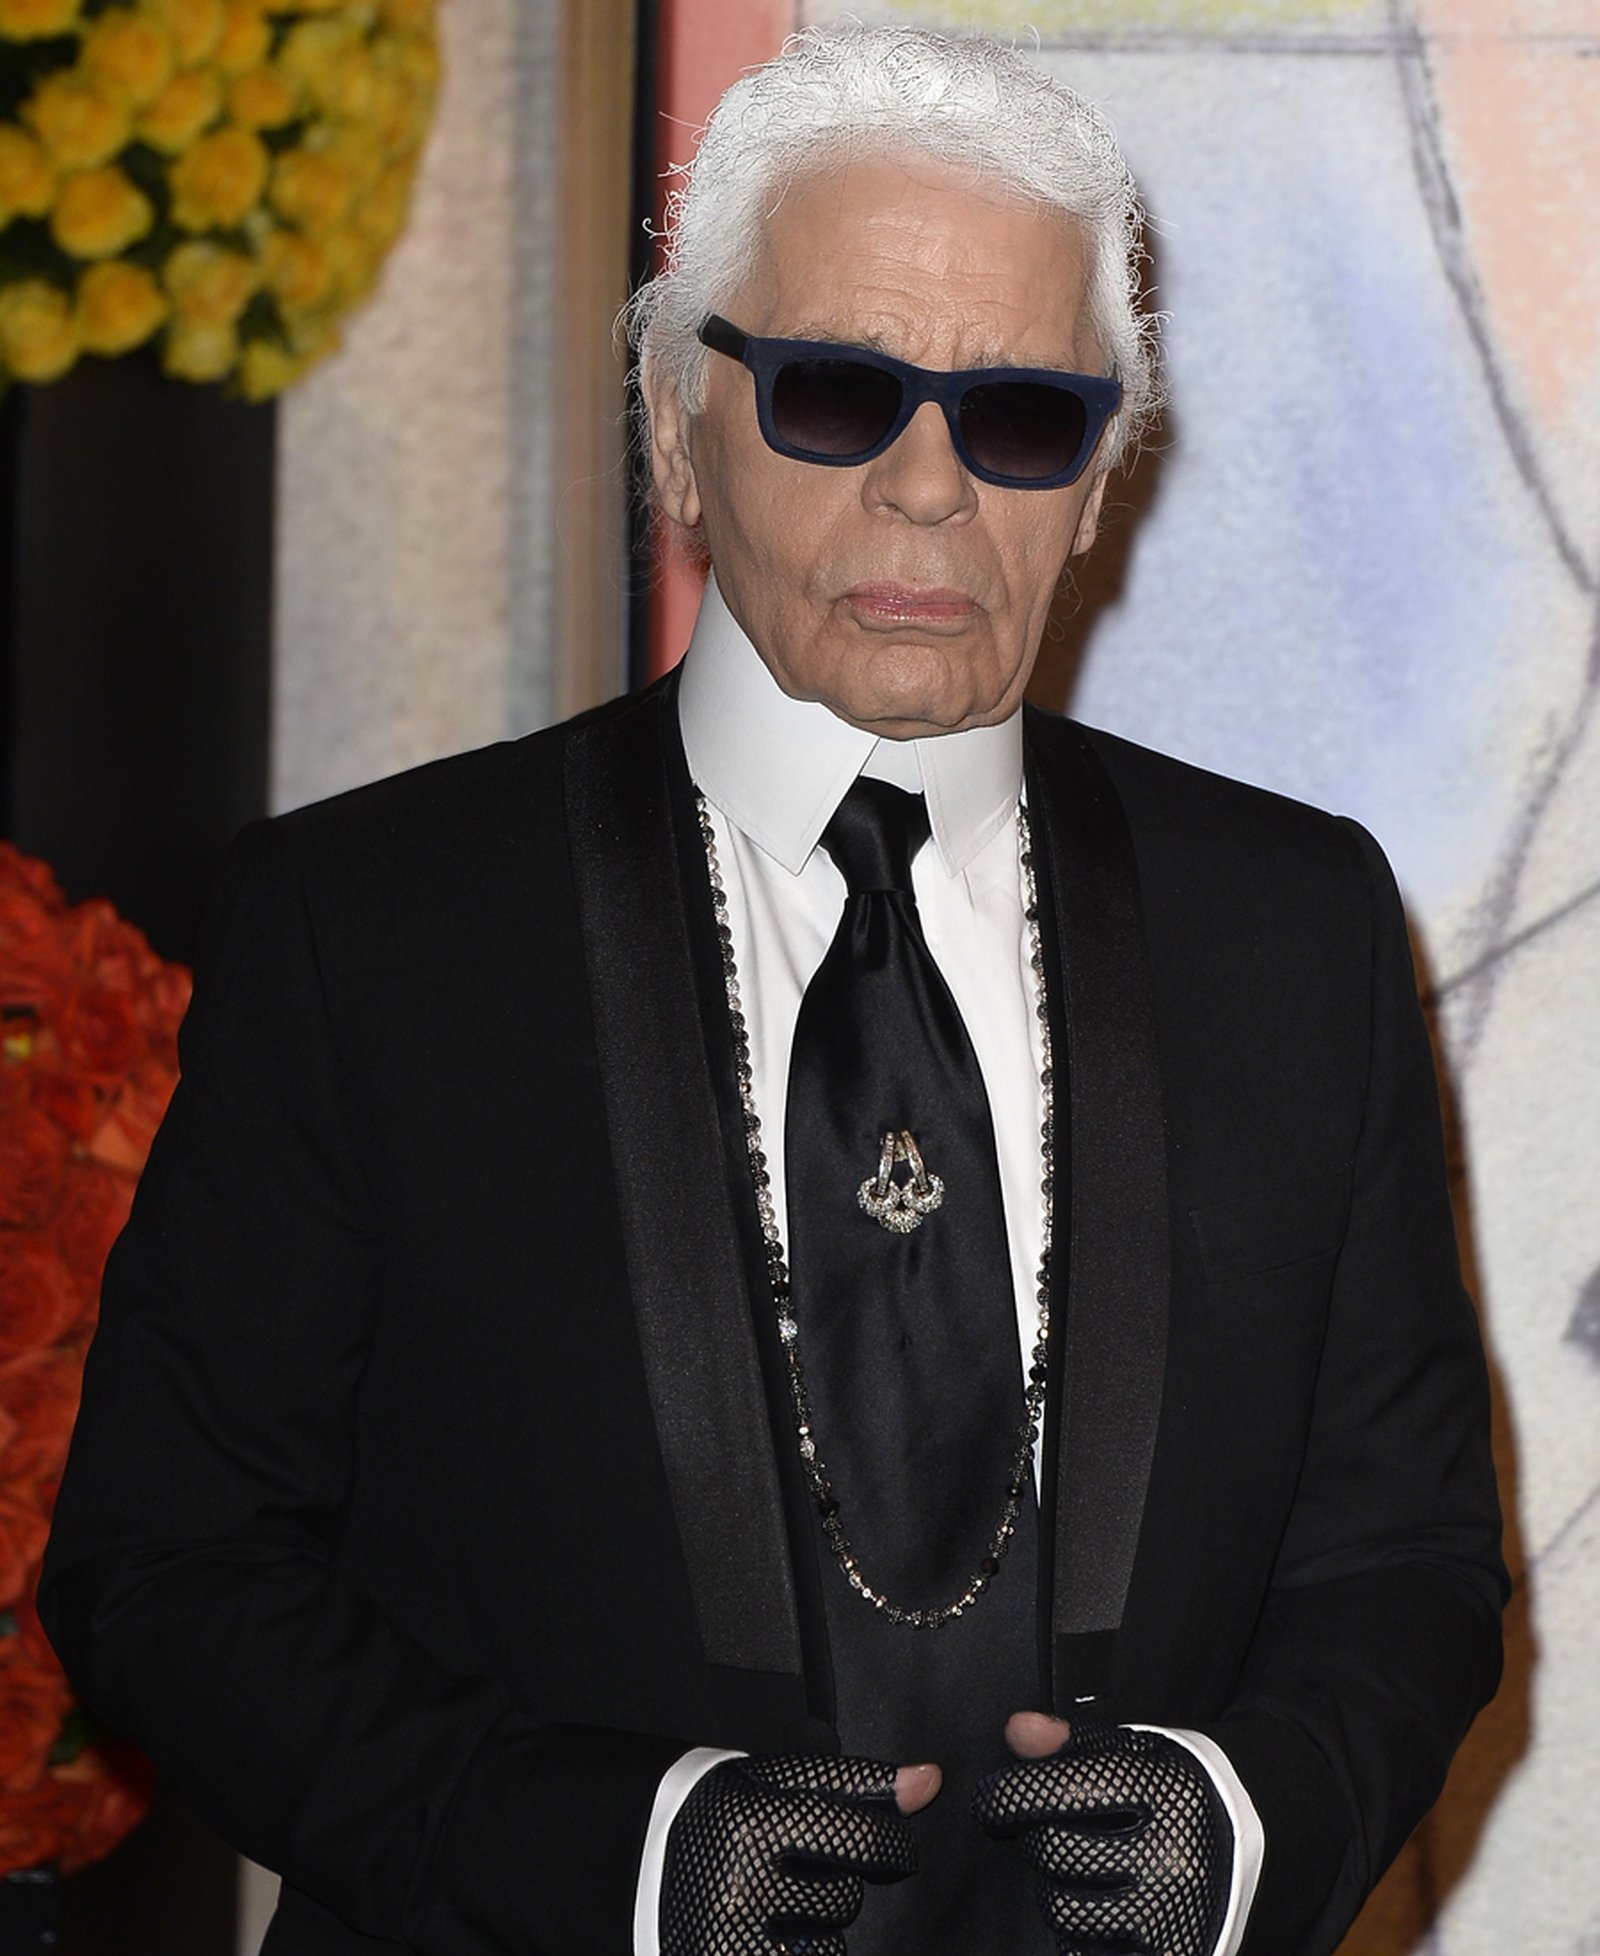 Karl Lagerfeld and Christian Louboutin for Louis Vuitton? - my